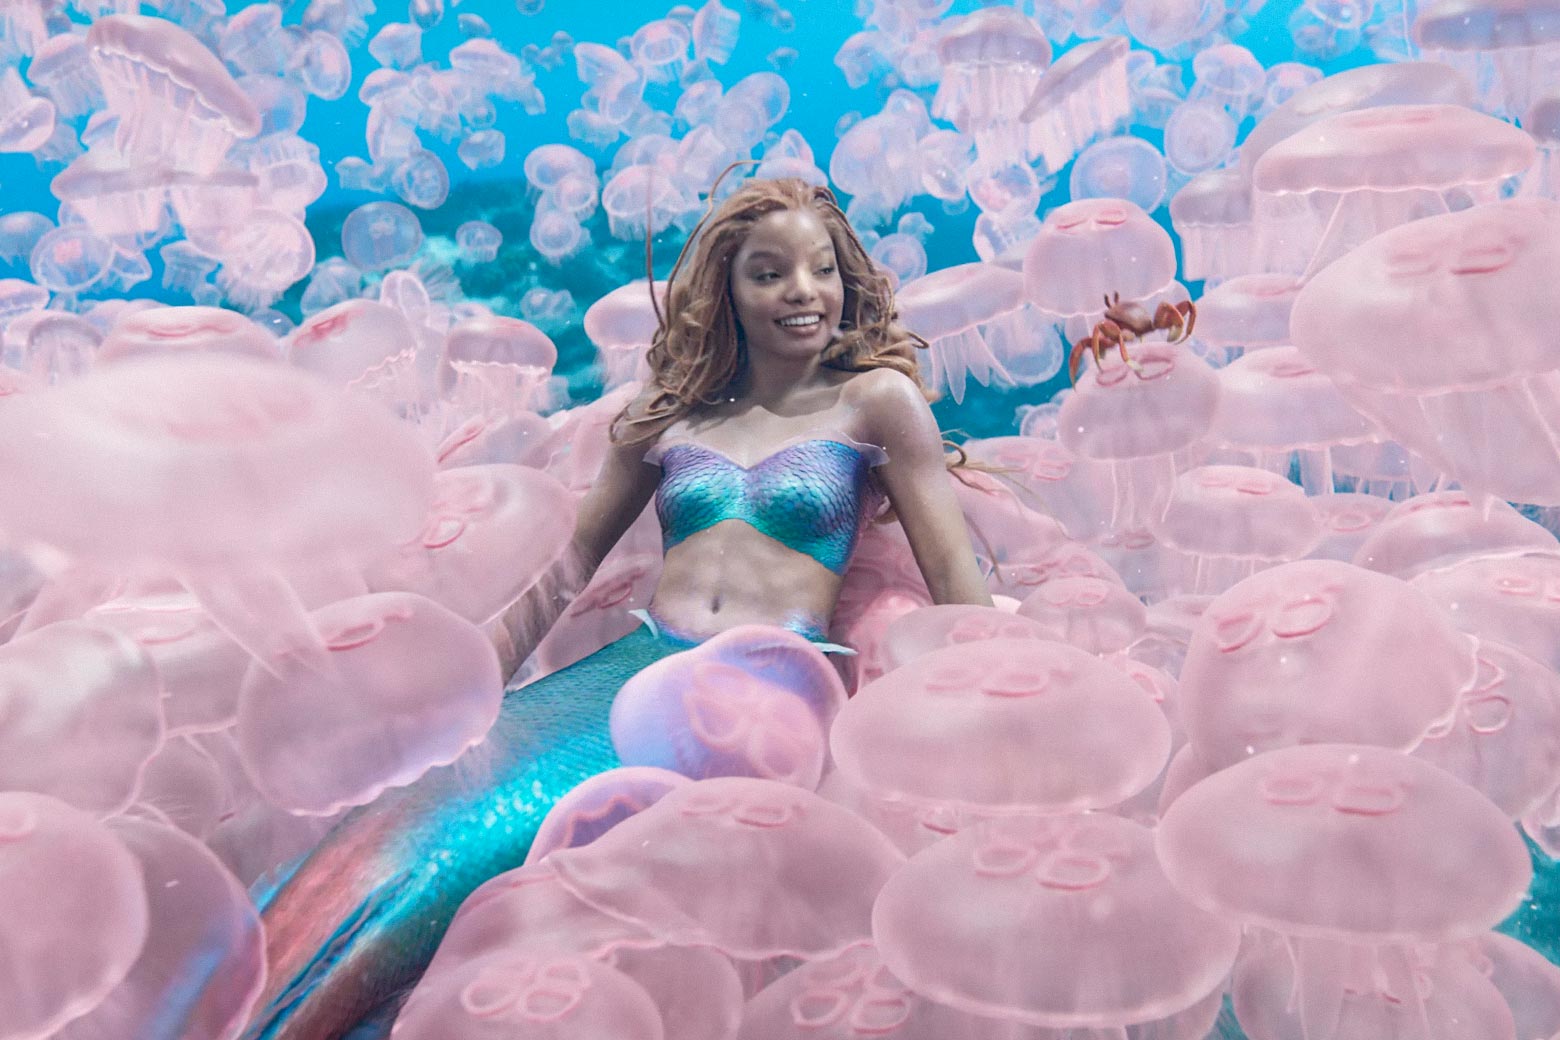 Ariel sits on a large group of bright pink jellyfishes and smiles.